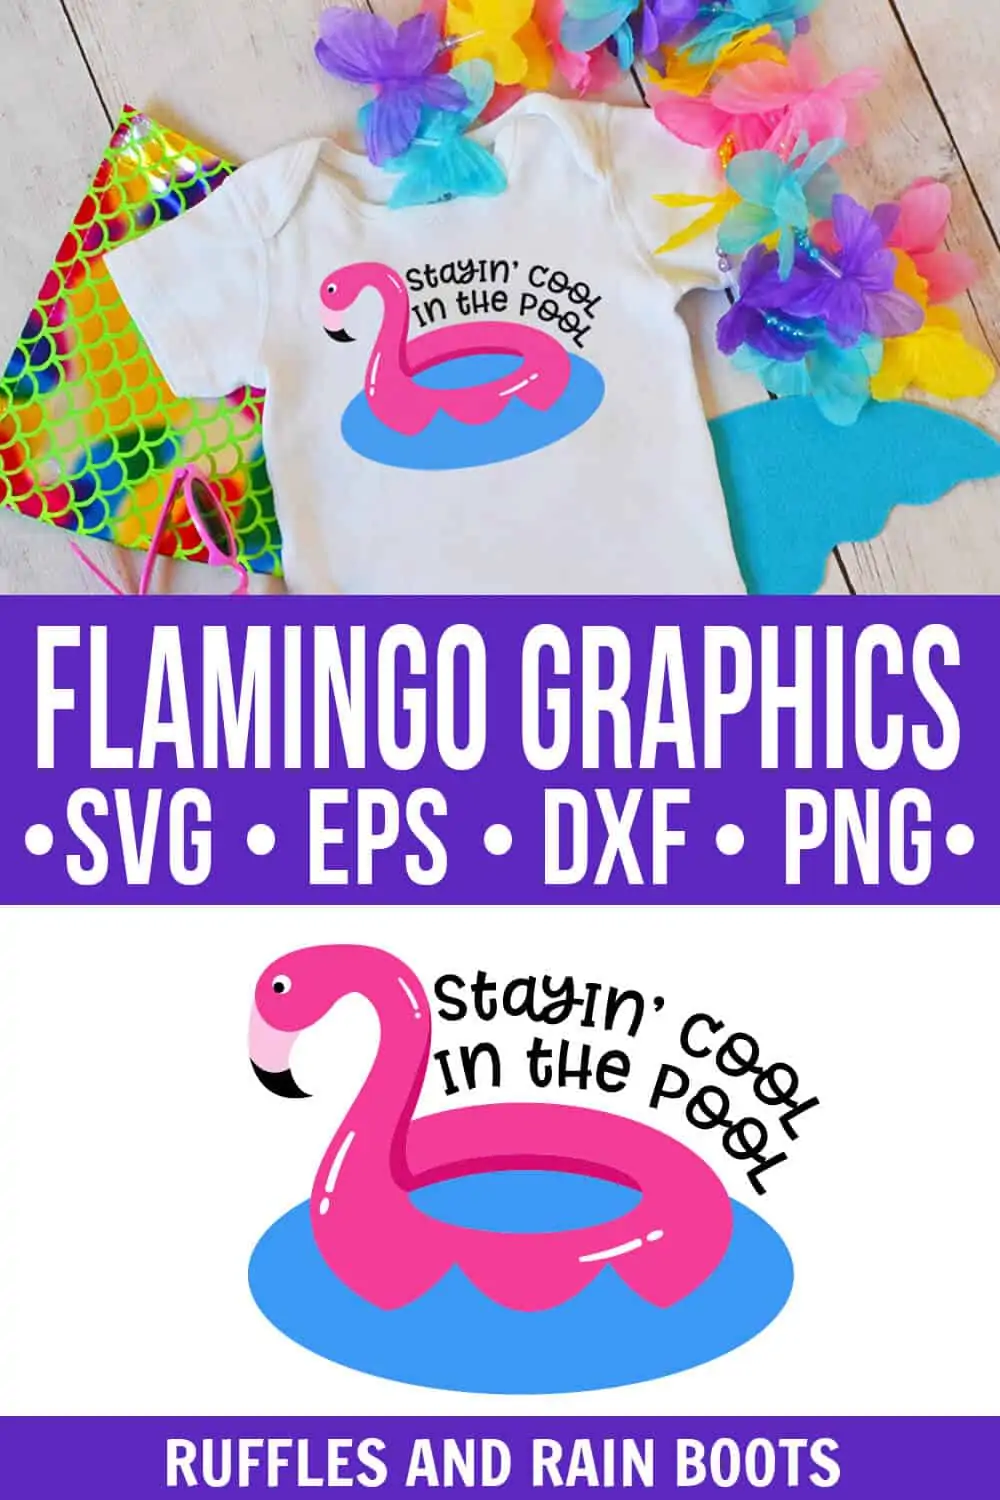 photo collage of flamingo clipart graphics svg stayin cool pool summer cut file with text which reads flamingo graphics svg eps dxf png